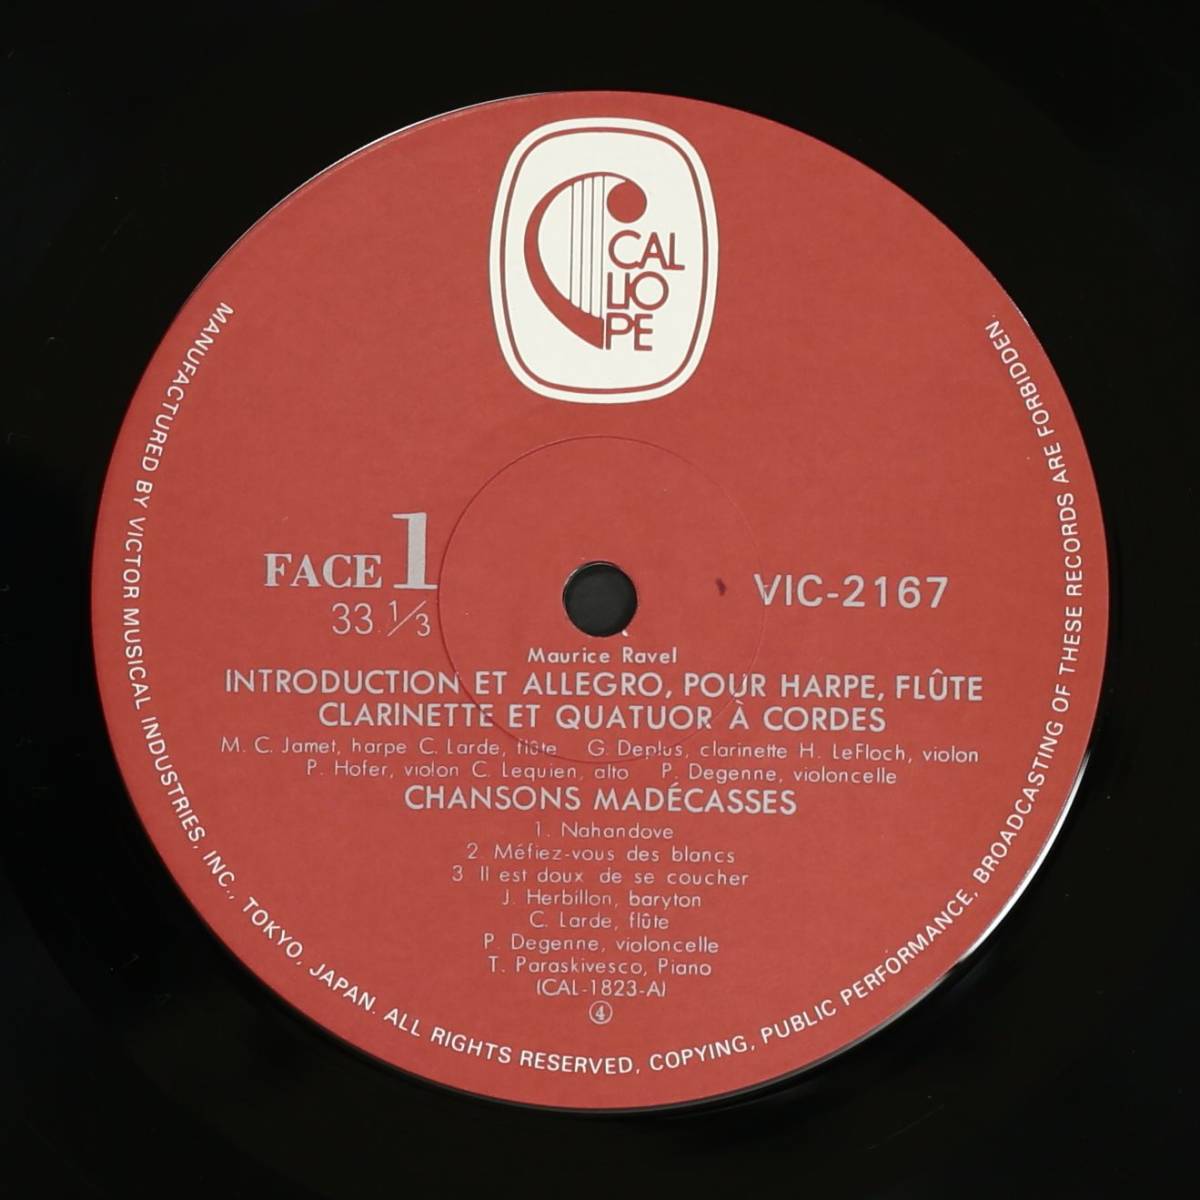 [ domestic record LP]dobyusi- string comfort four -ply .. other /laveru:. bending .are Glo, string comfort four -ply . bending other ( average superior article,CALLIOPE, Kiss rof, super preeminence recording )